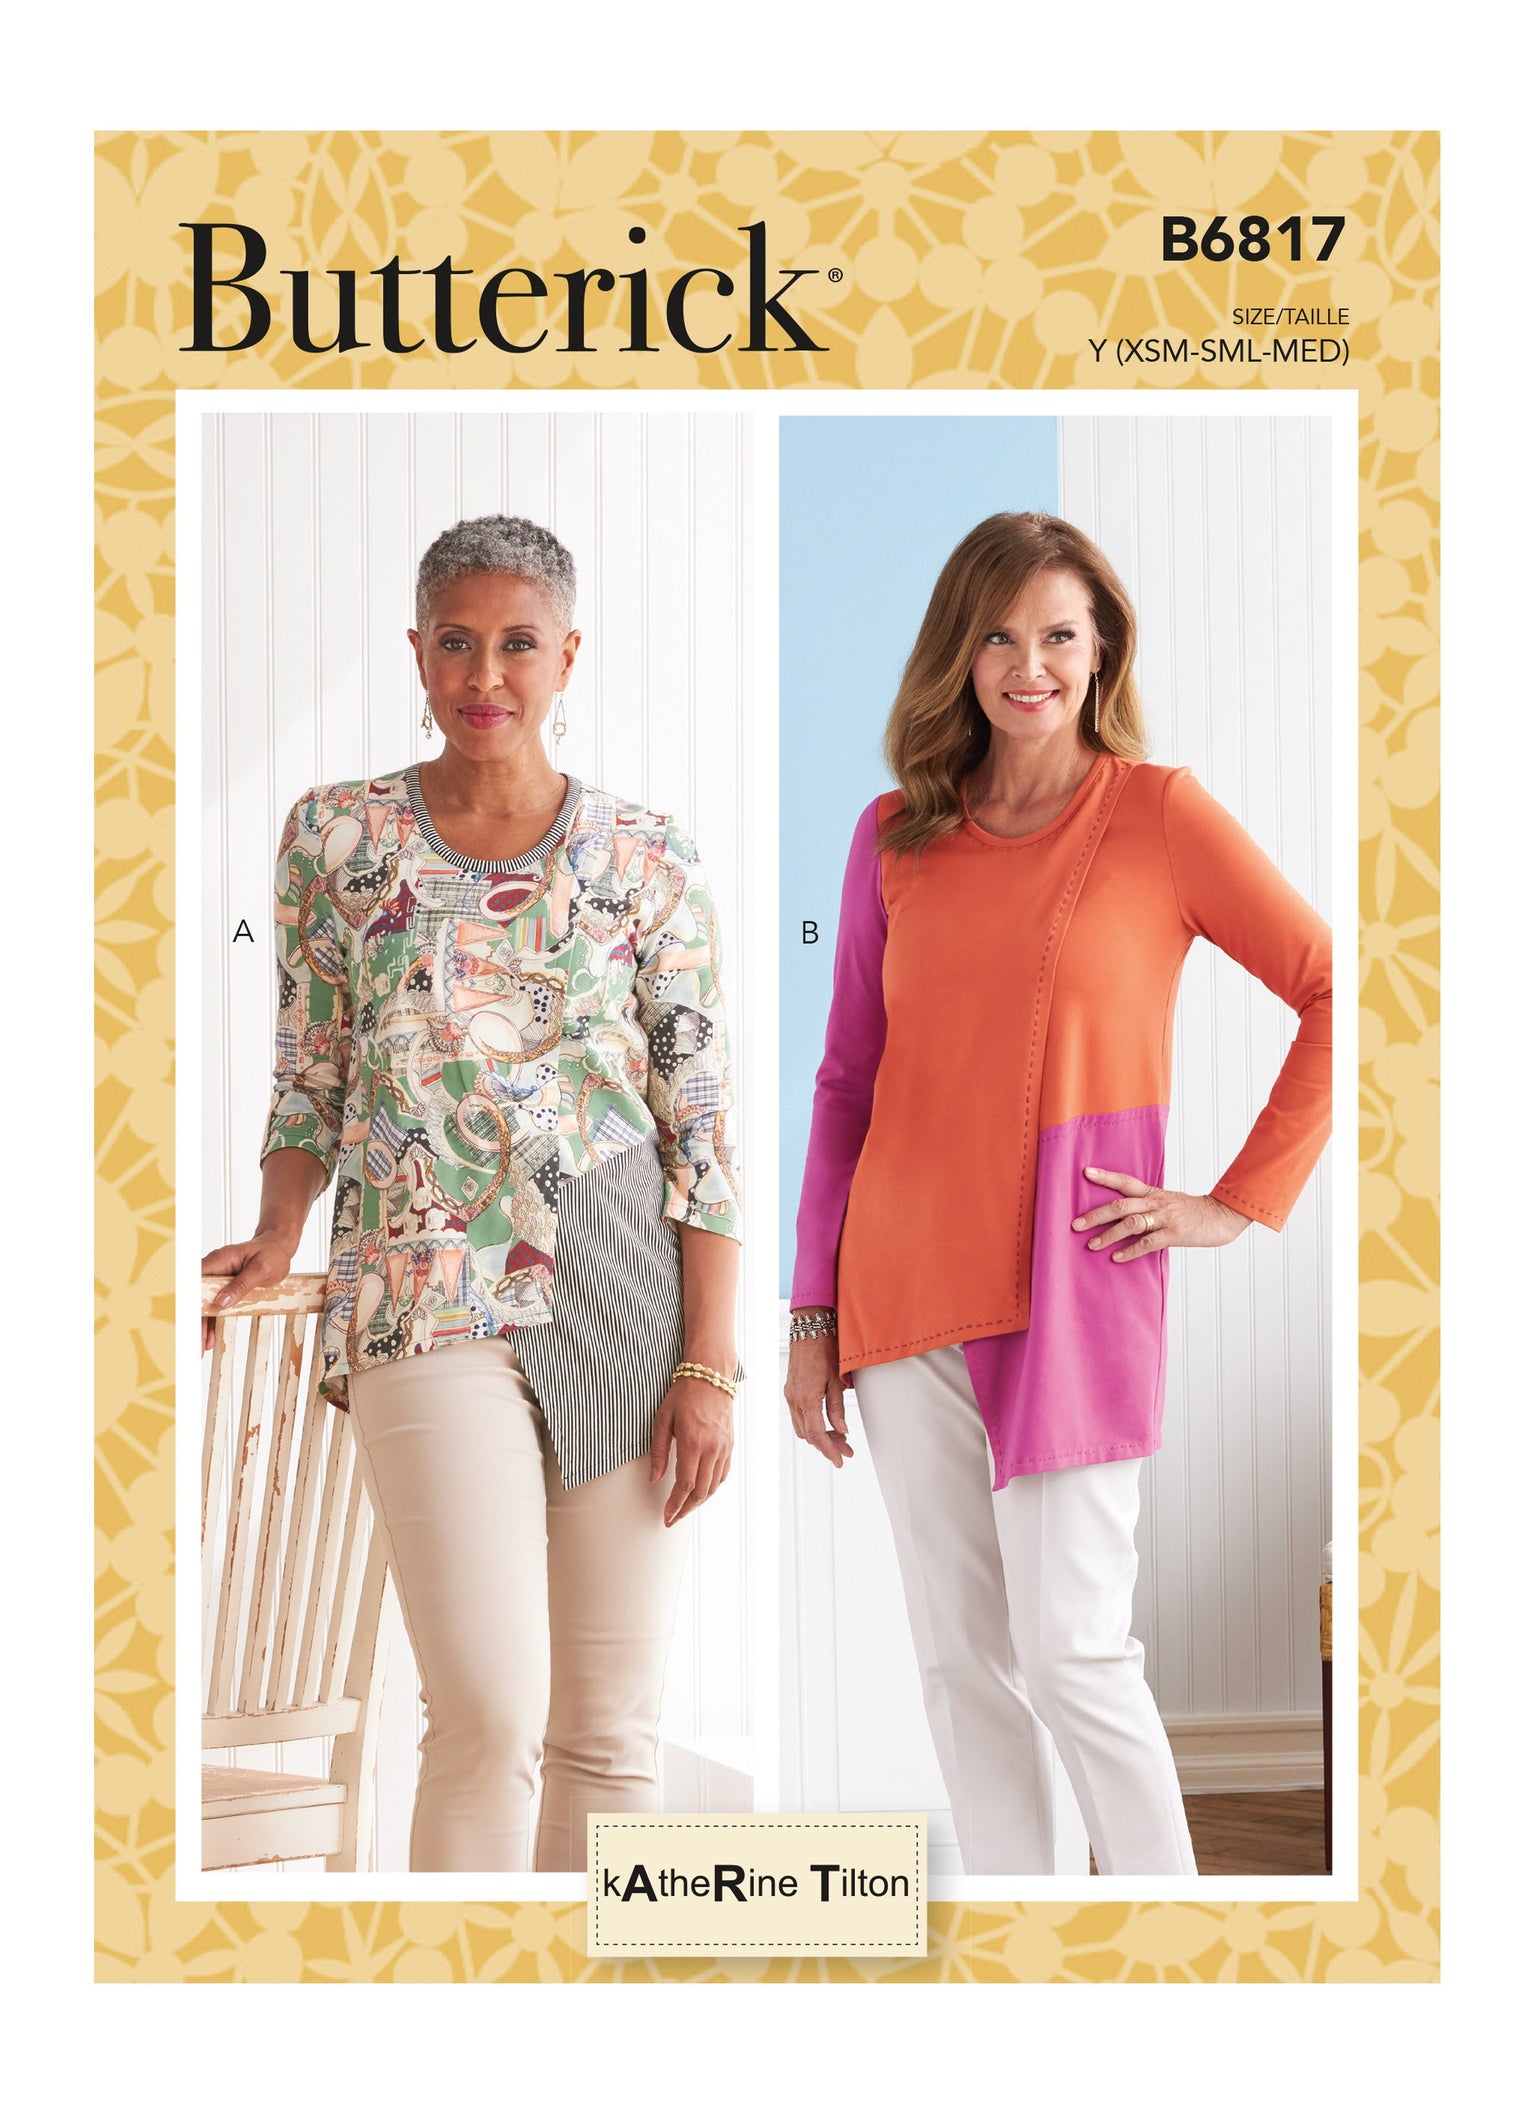 Sewing Patterns | Tops and Blouses — Page 7 — jaycotts.co.uk - Sewing ...